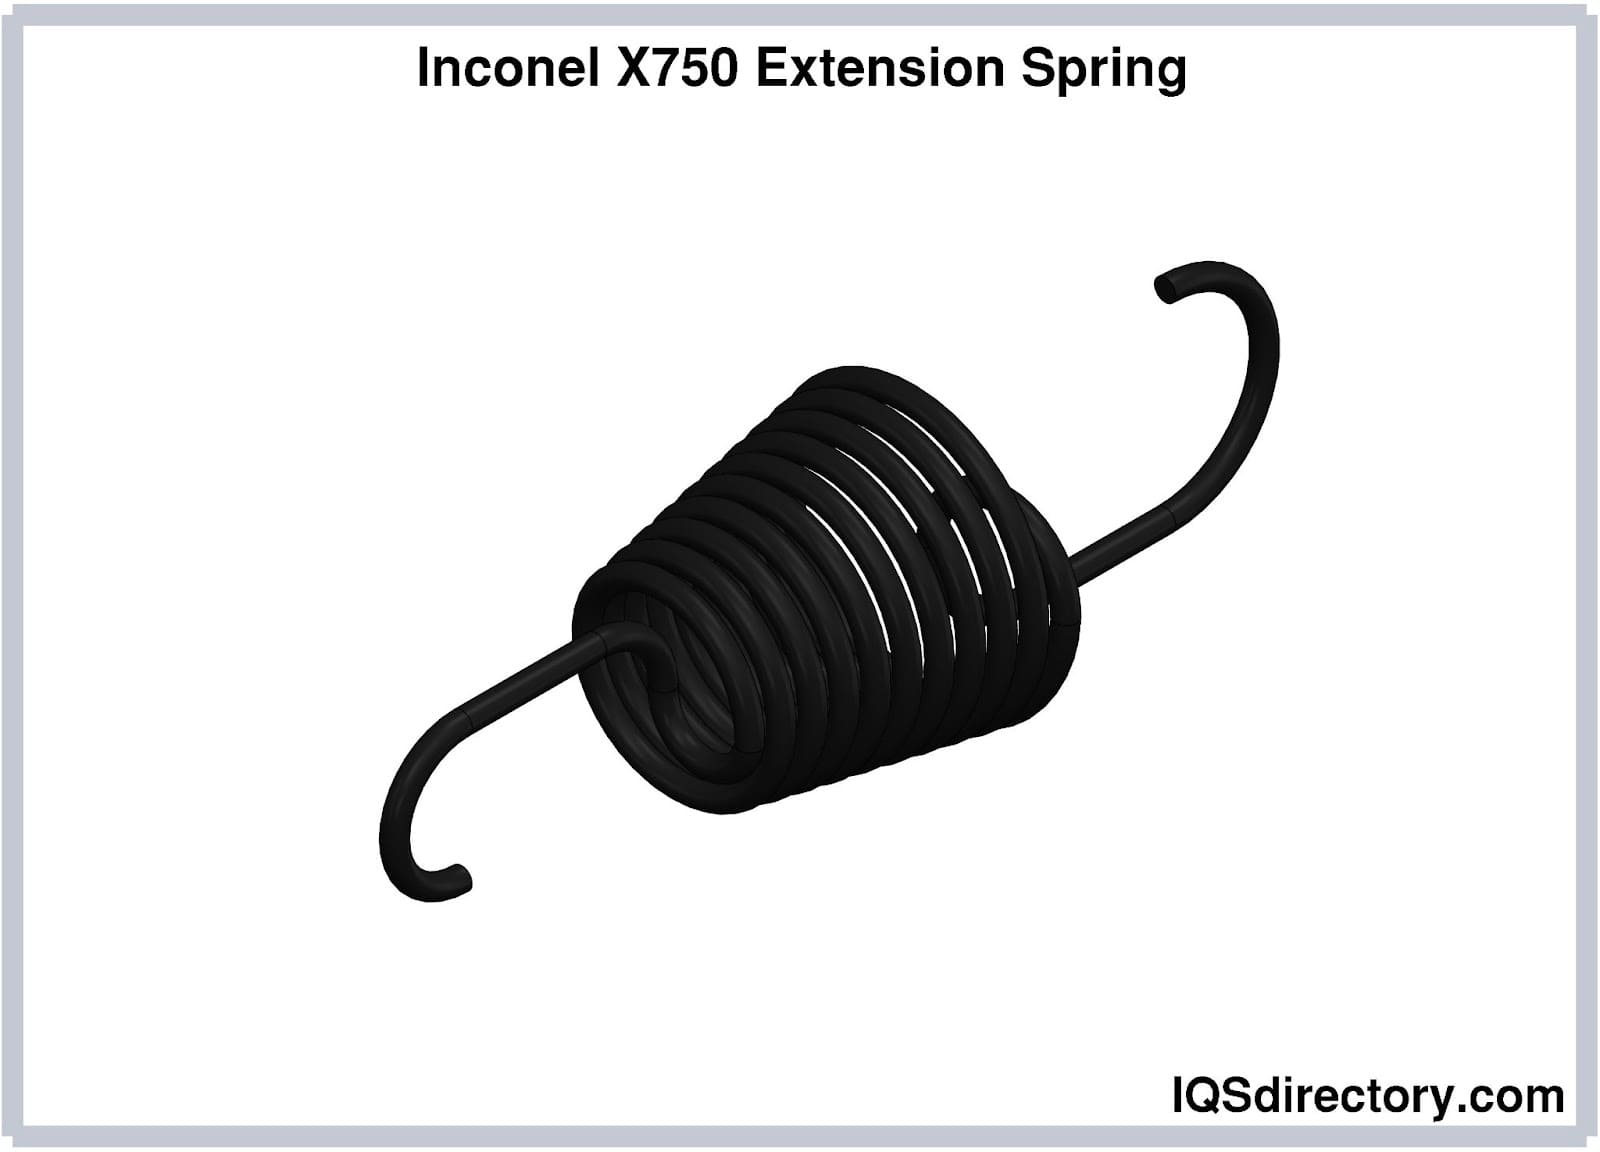 Inconel X750 Extension Spring